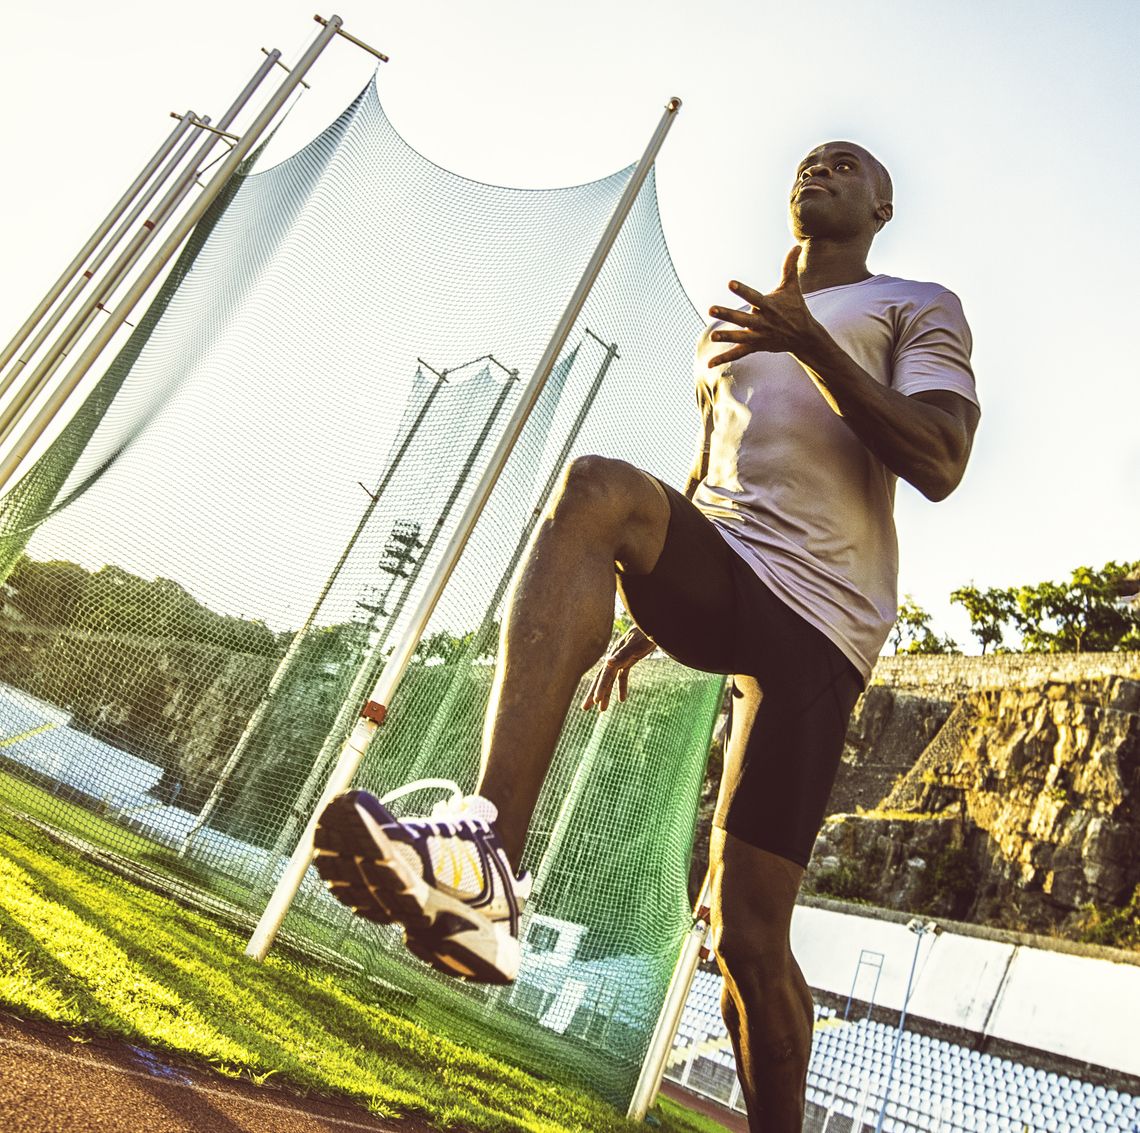 You Should Do Sprint Workouts Even After 40. This Drill Will Prep You for Speed.